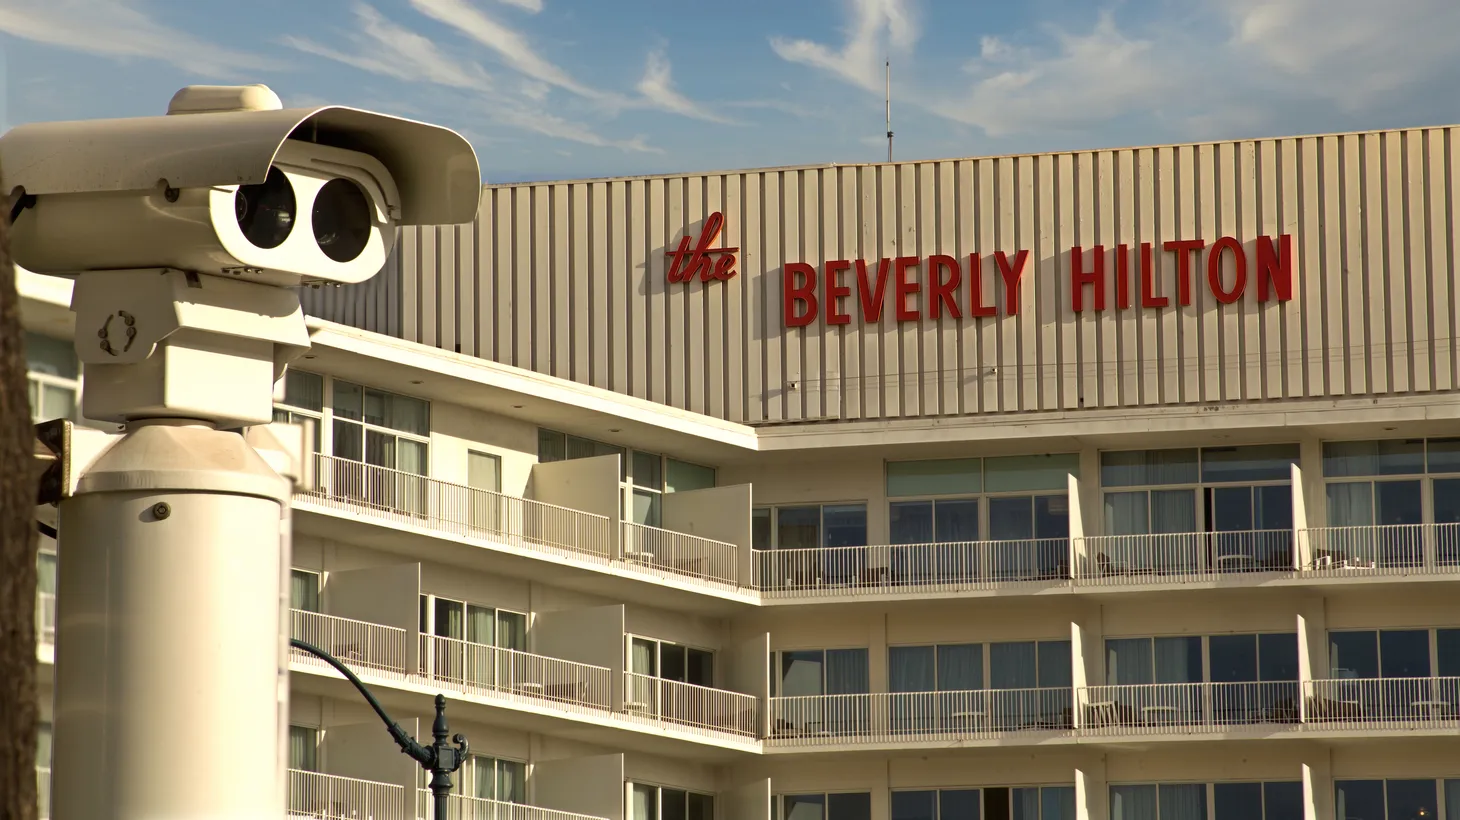 A camera is located next to the Beverly Hilton Hotel in Beverly Hills, California.